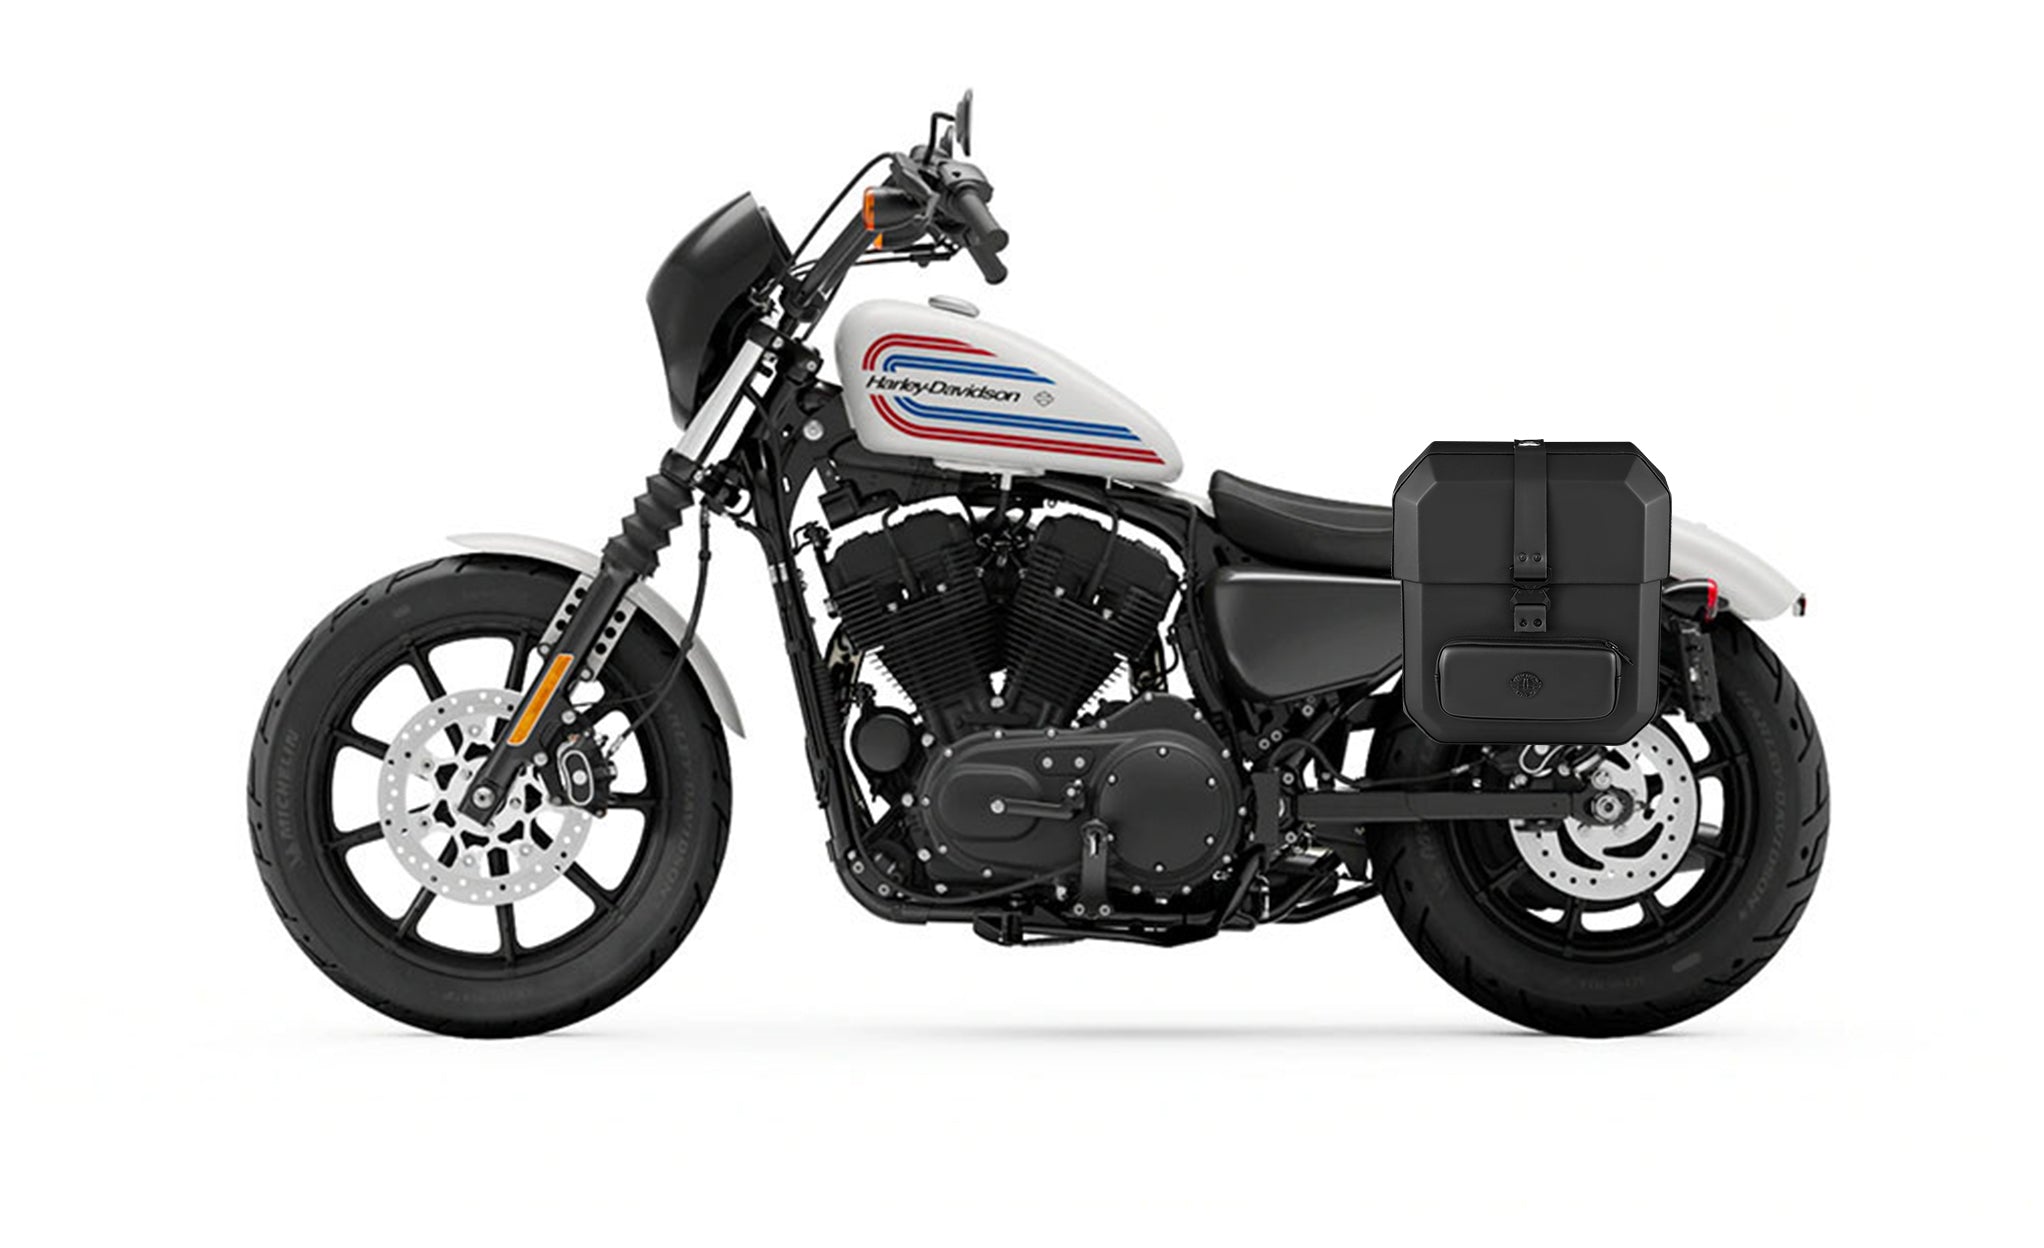 15L - Outlaw Quick Mount Medium Harley Sportster Iron 1200 Hard Solo Saddlebag (Left Only) @expand